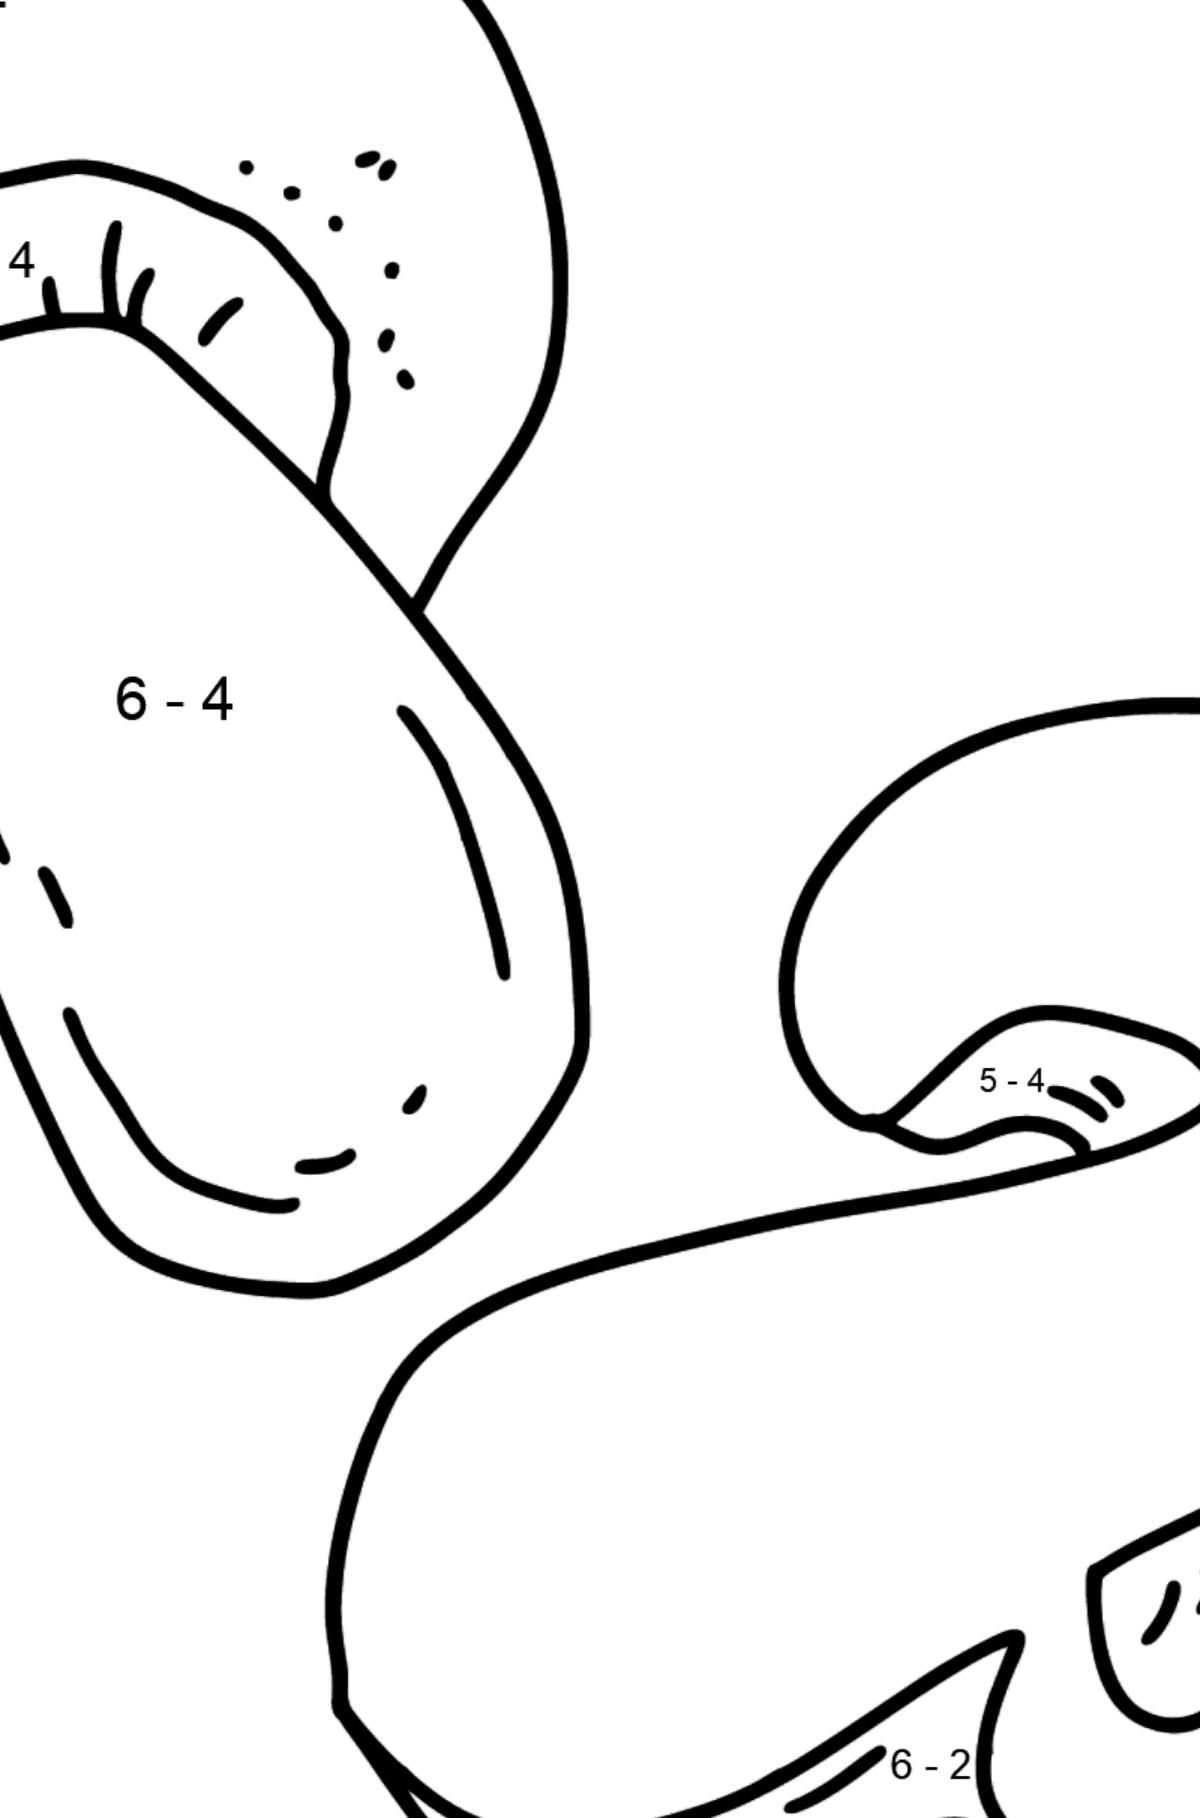 Royal Champignons coloring page - Math Coloring - Subtraction for Kids